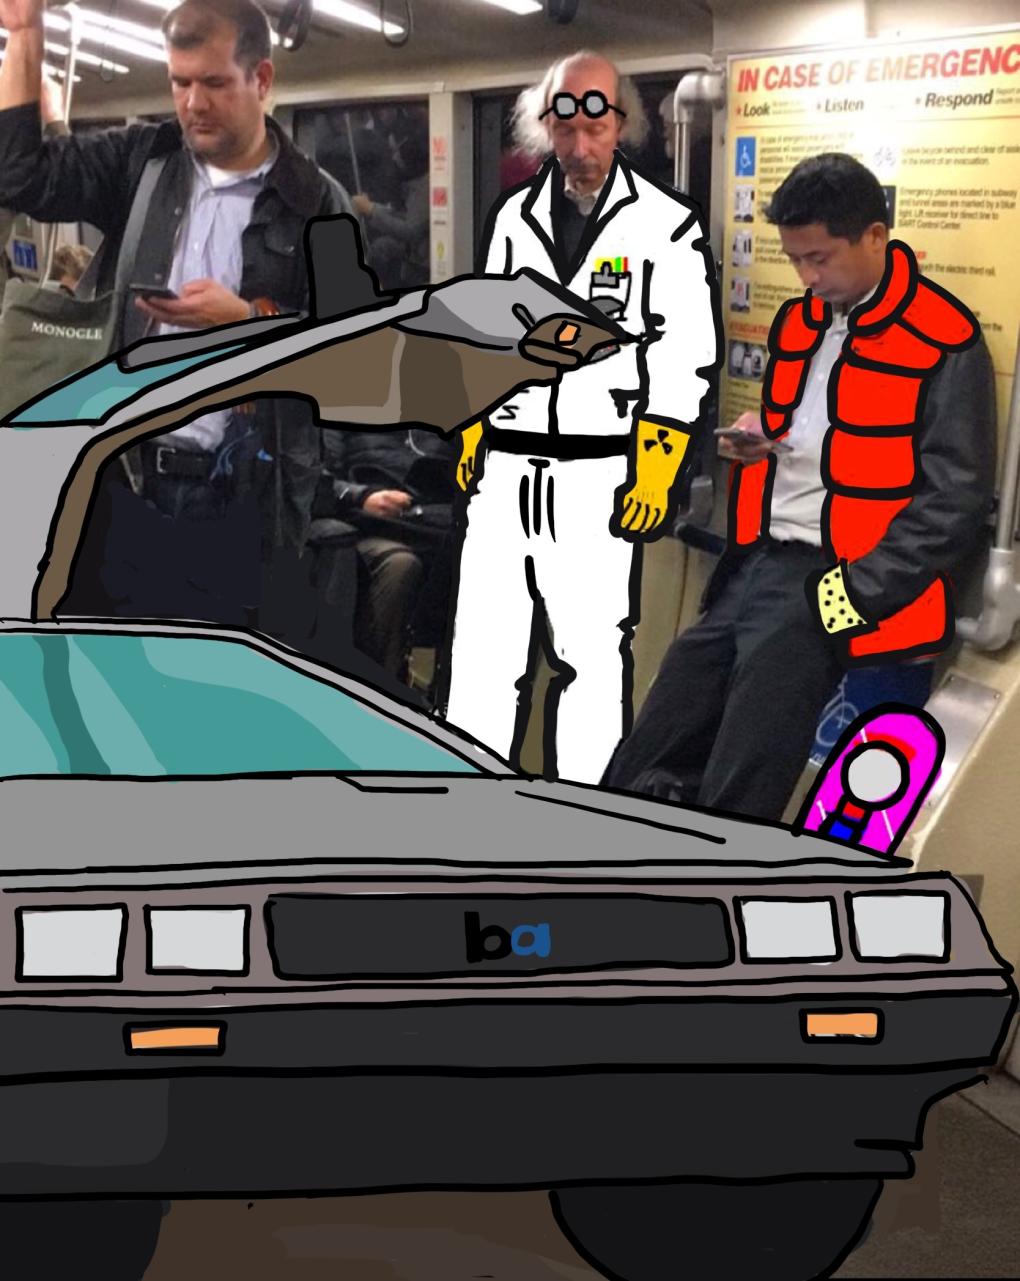 Characters from Back to the Future (Doc in white and Marty McFly in red) along with the Delorean time machine